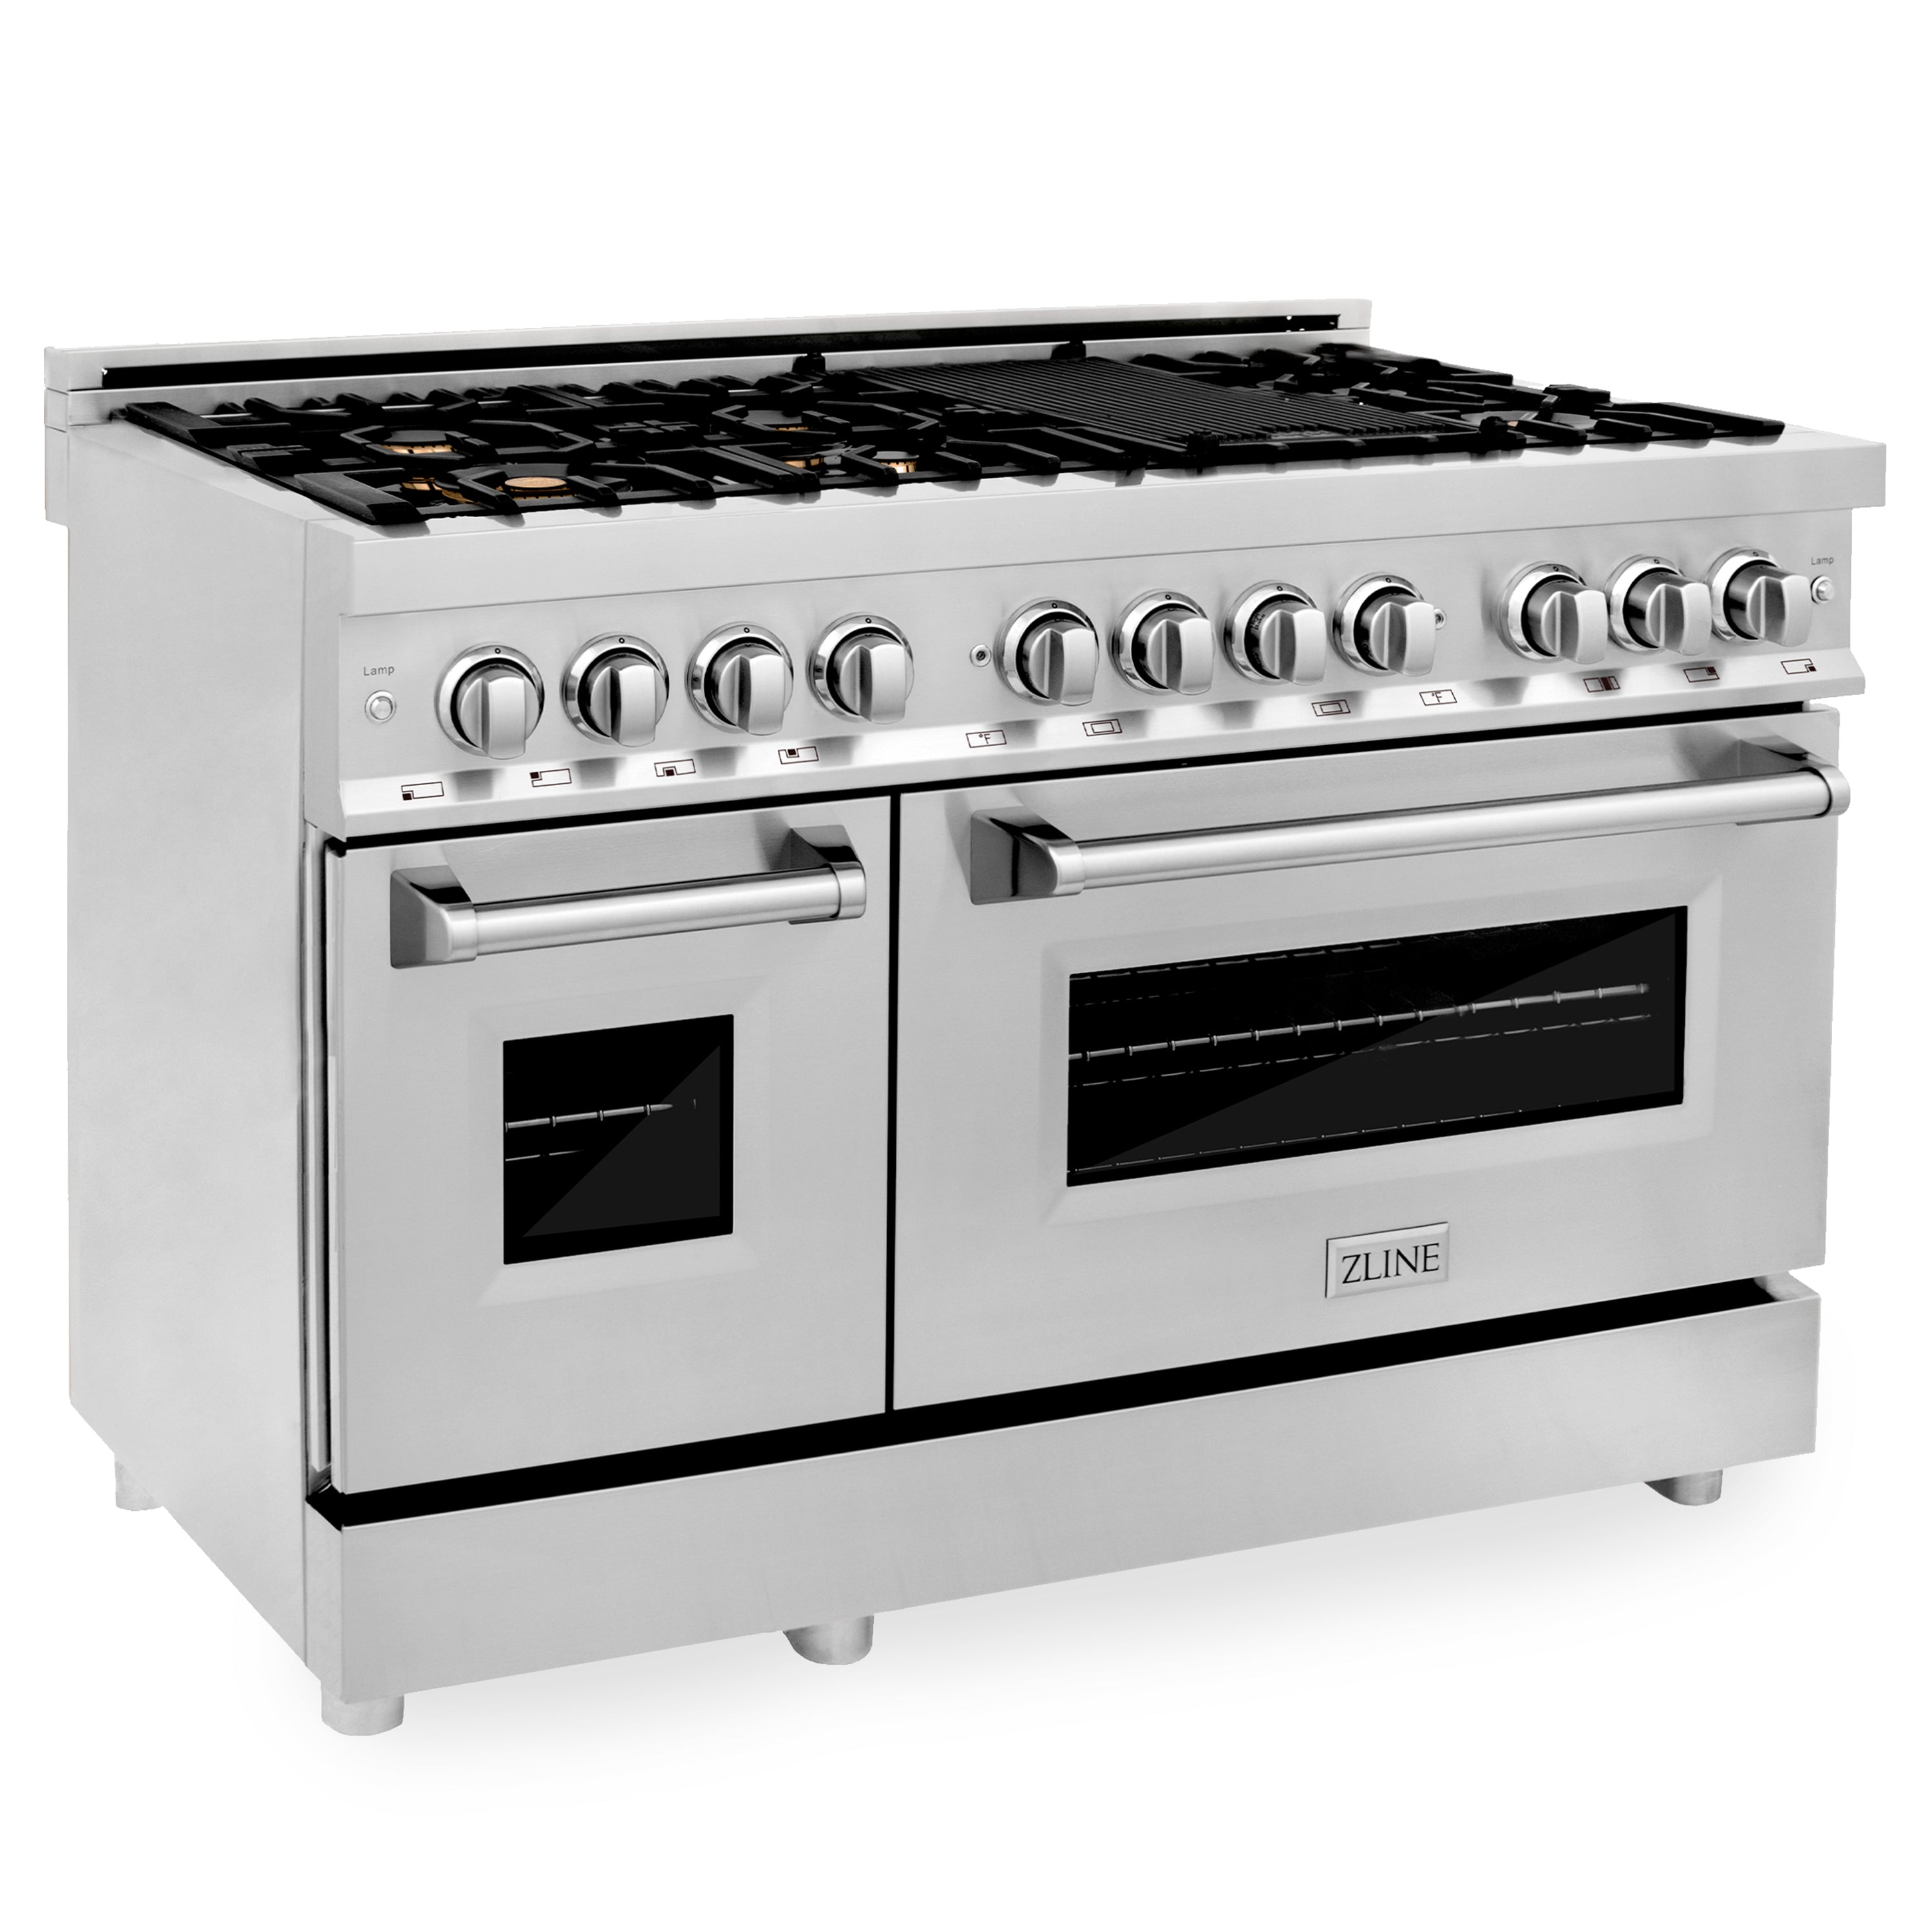 ZLINE 48" 6.0 cu. ft. Dual Fuel Range with Gas Stove and Electric Oven in Stainless Steel with Brass Burners (RA-BR-48)